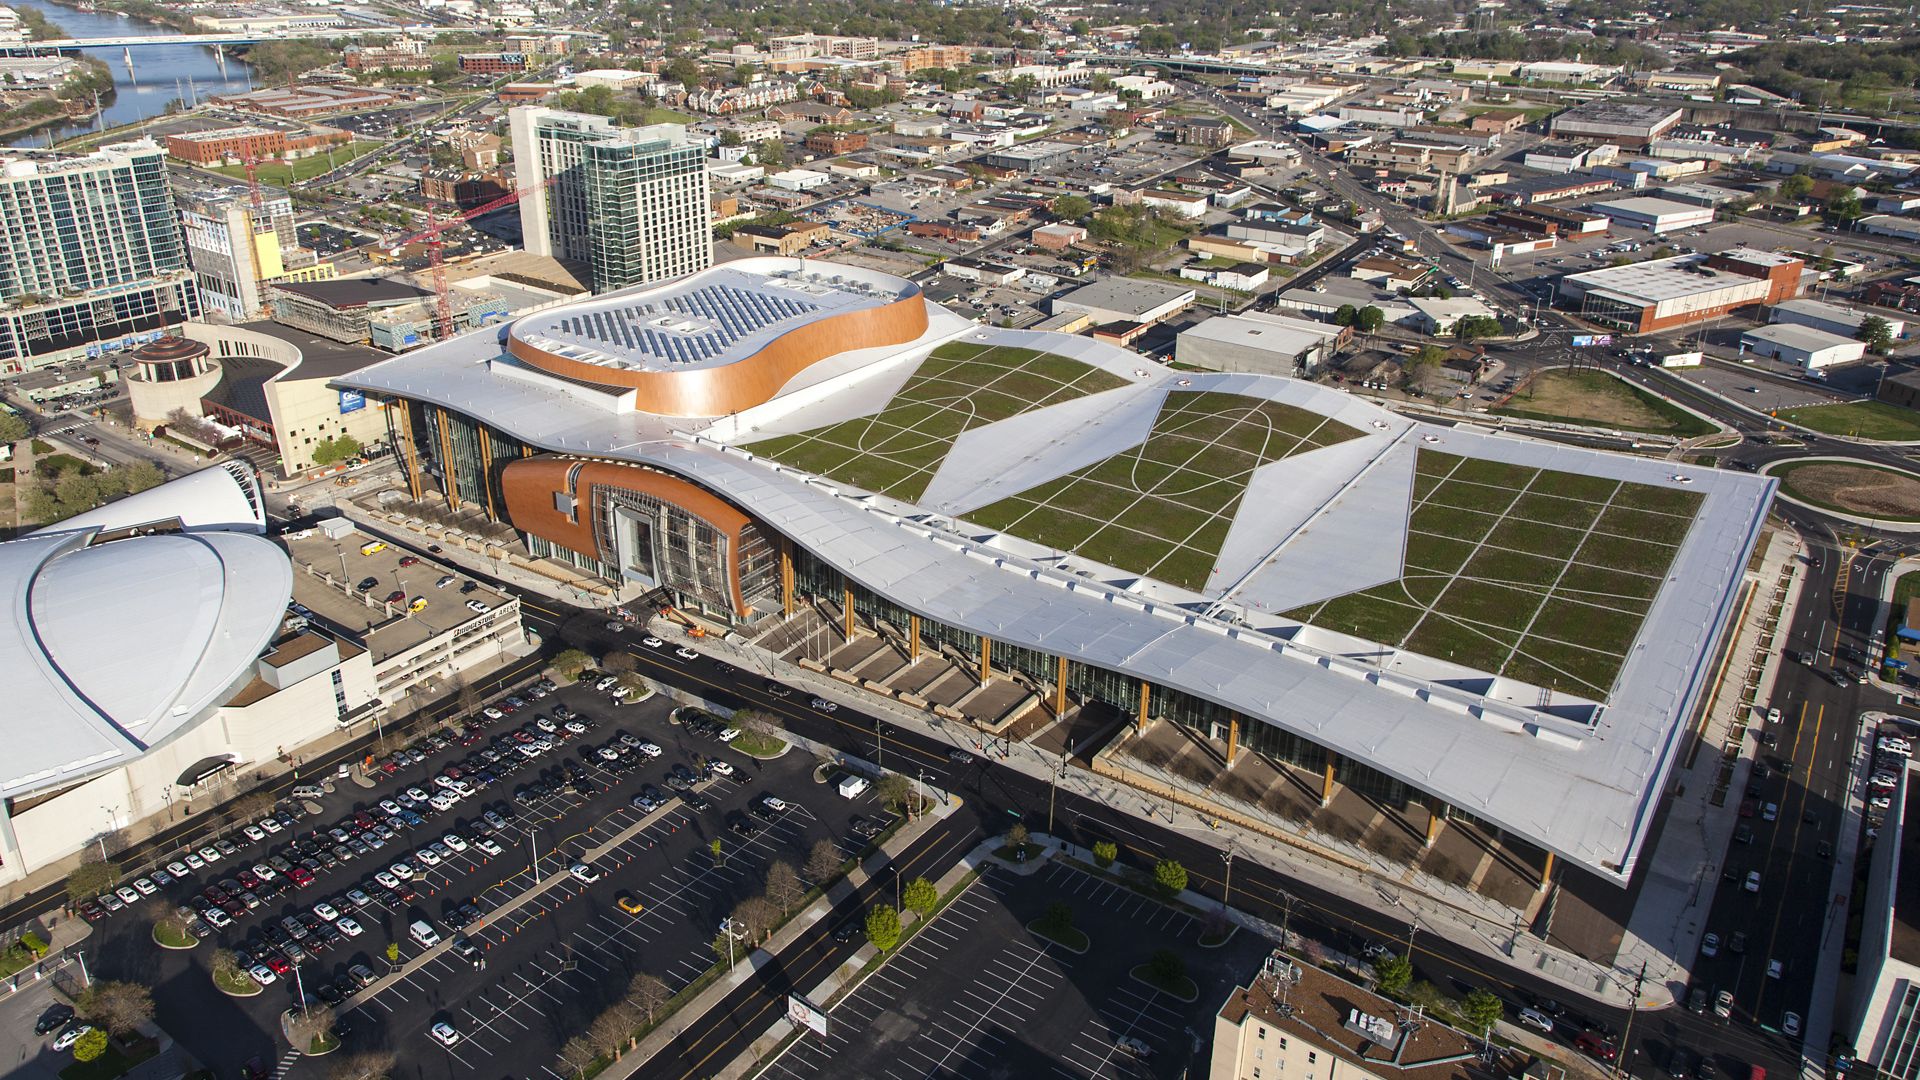 Green roof with single-ply membrane installed on Music City Center in Nashville in USA